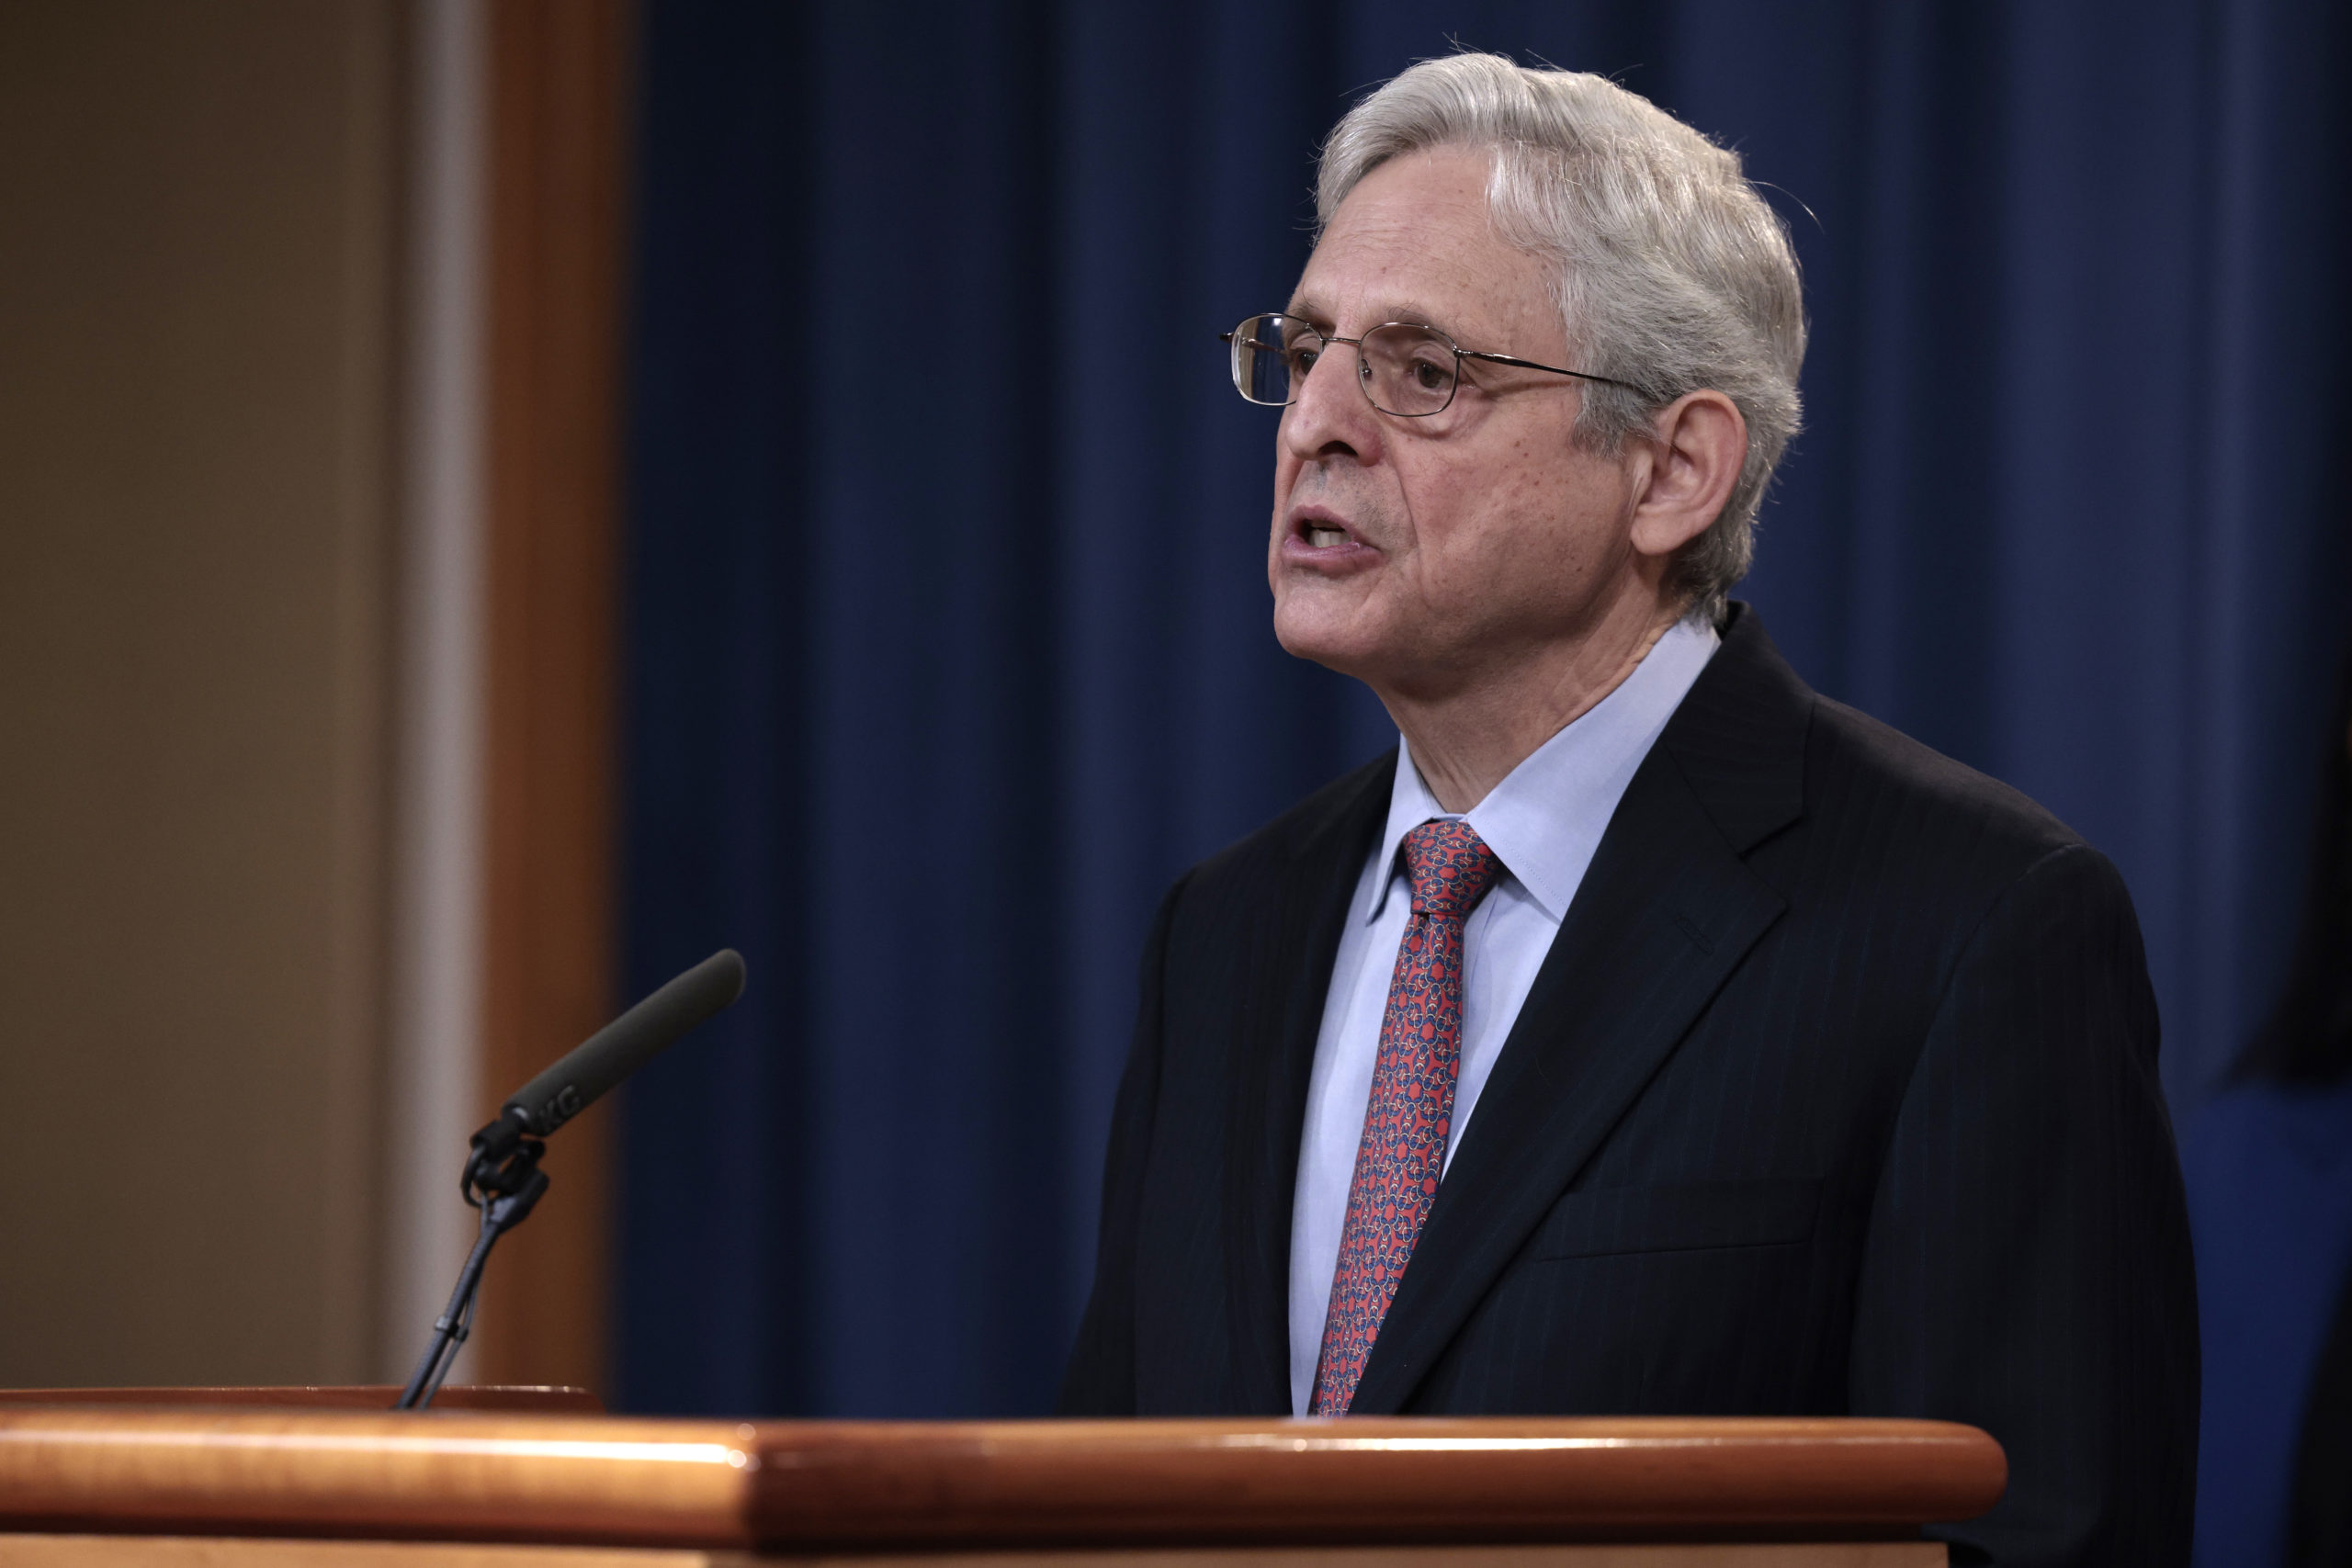 WASHINGTON, DC - DECEMBER 06: Attorney General Merrick B. Garland speaks at a press conference at the Department of Justice on December 06, 2021 in Washington, DC. Garland and Associate Attorney General Vanita Gupta held the press conference to announce that the Justice department was suing Texas over their recent redistricting which the department says violates the Voting Rights Act. (Photo by Anna Moneymaker/Getty Images)